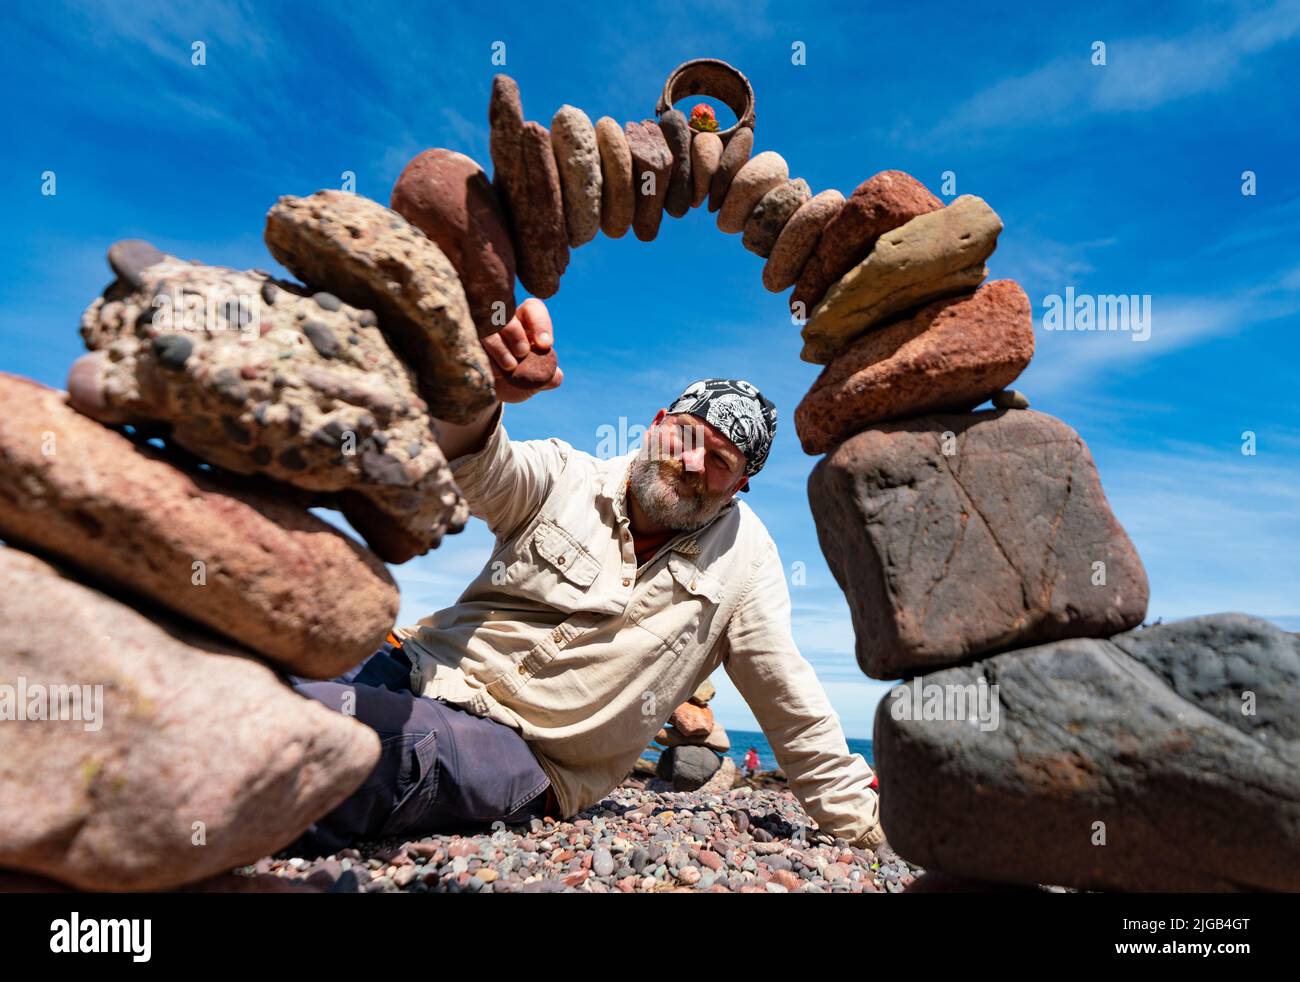 Dunbar, Scotland, UK. 9 July 2022. Day one of the 11th Stone Stacking Championships held at Eye Cave Beach in Dunbar in East Lothian. . Competitors are shown during the arch building competition. Pic; James Brunt building his stone arch.  Iain Masterton/Alamy Live News Stock Photo